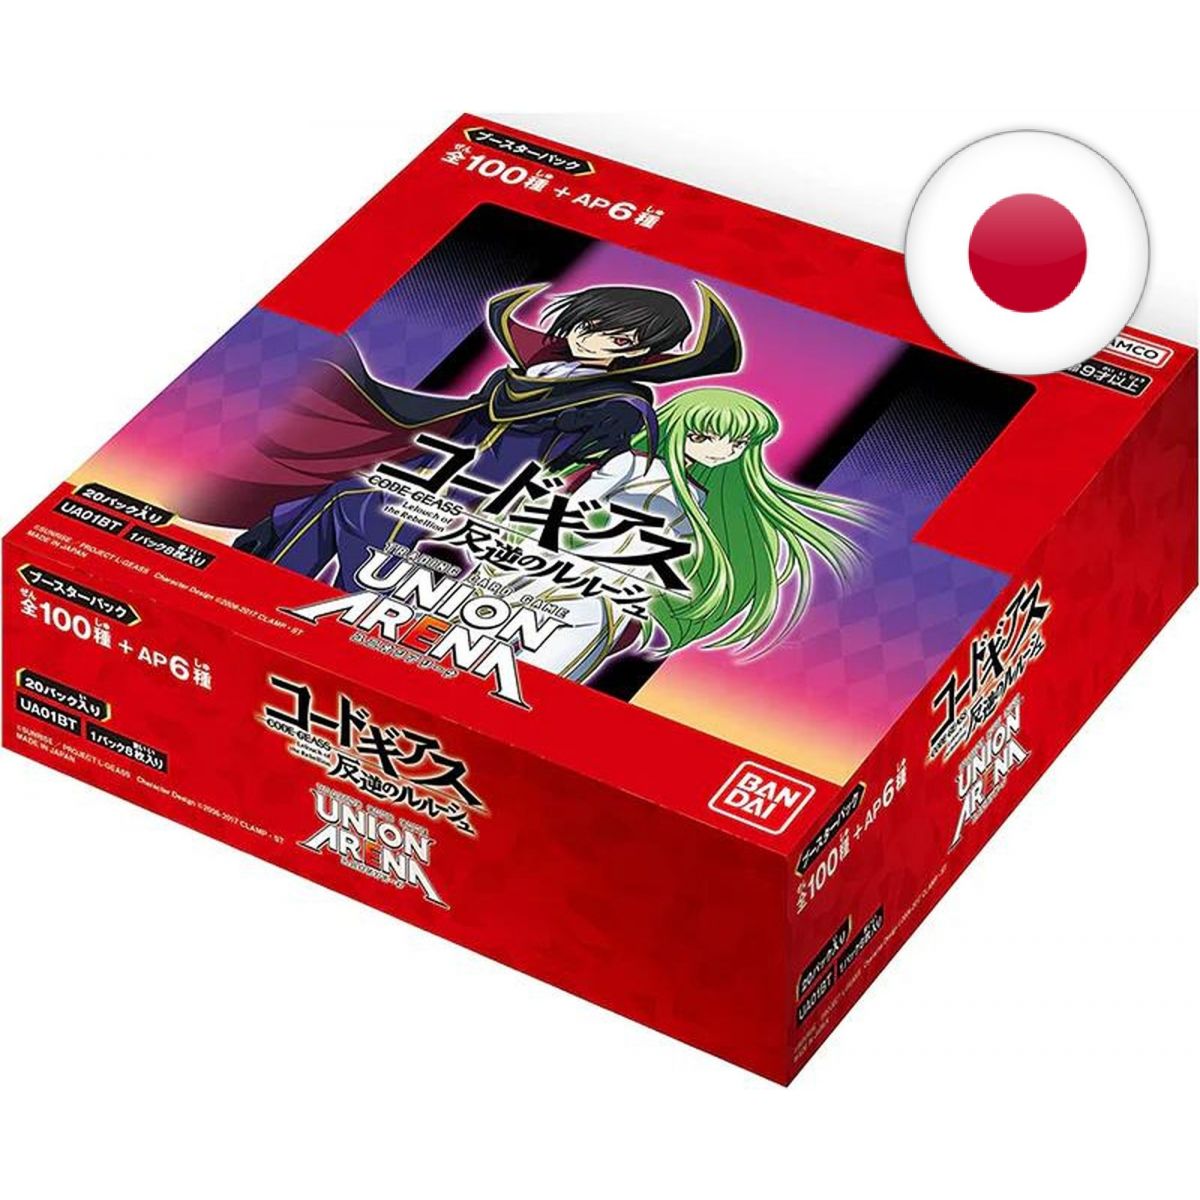 Item Union Arena - Display - Box of 20 Boosters - Code Geass Lelouch of the Rebellion - JP